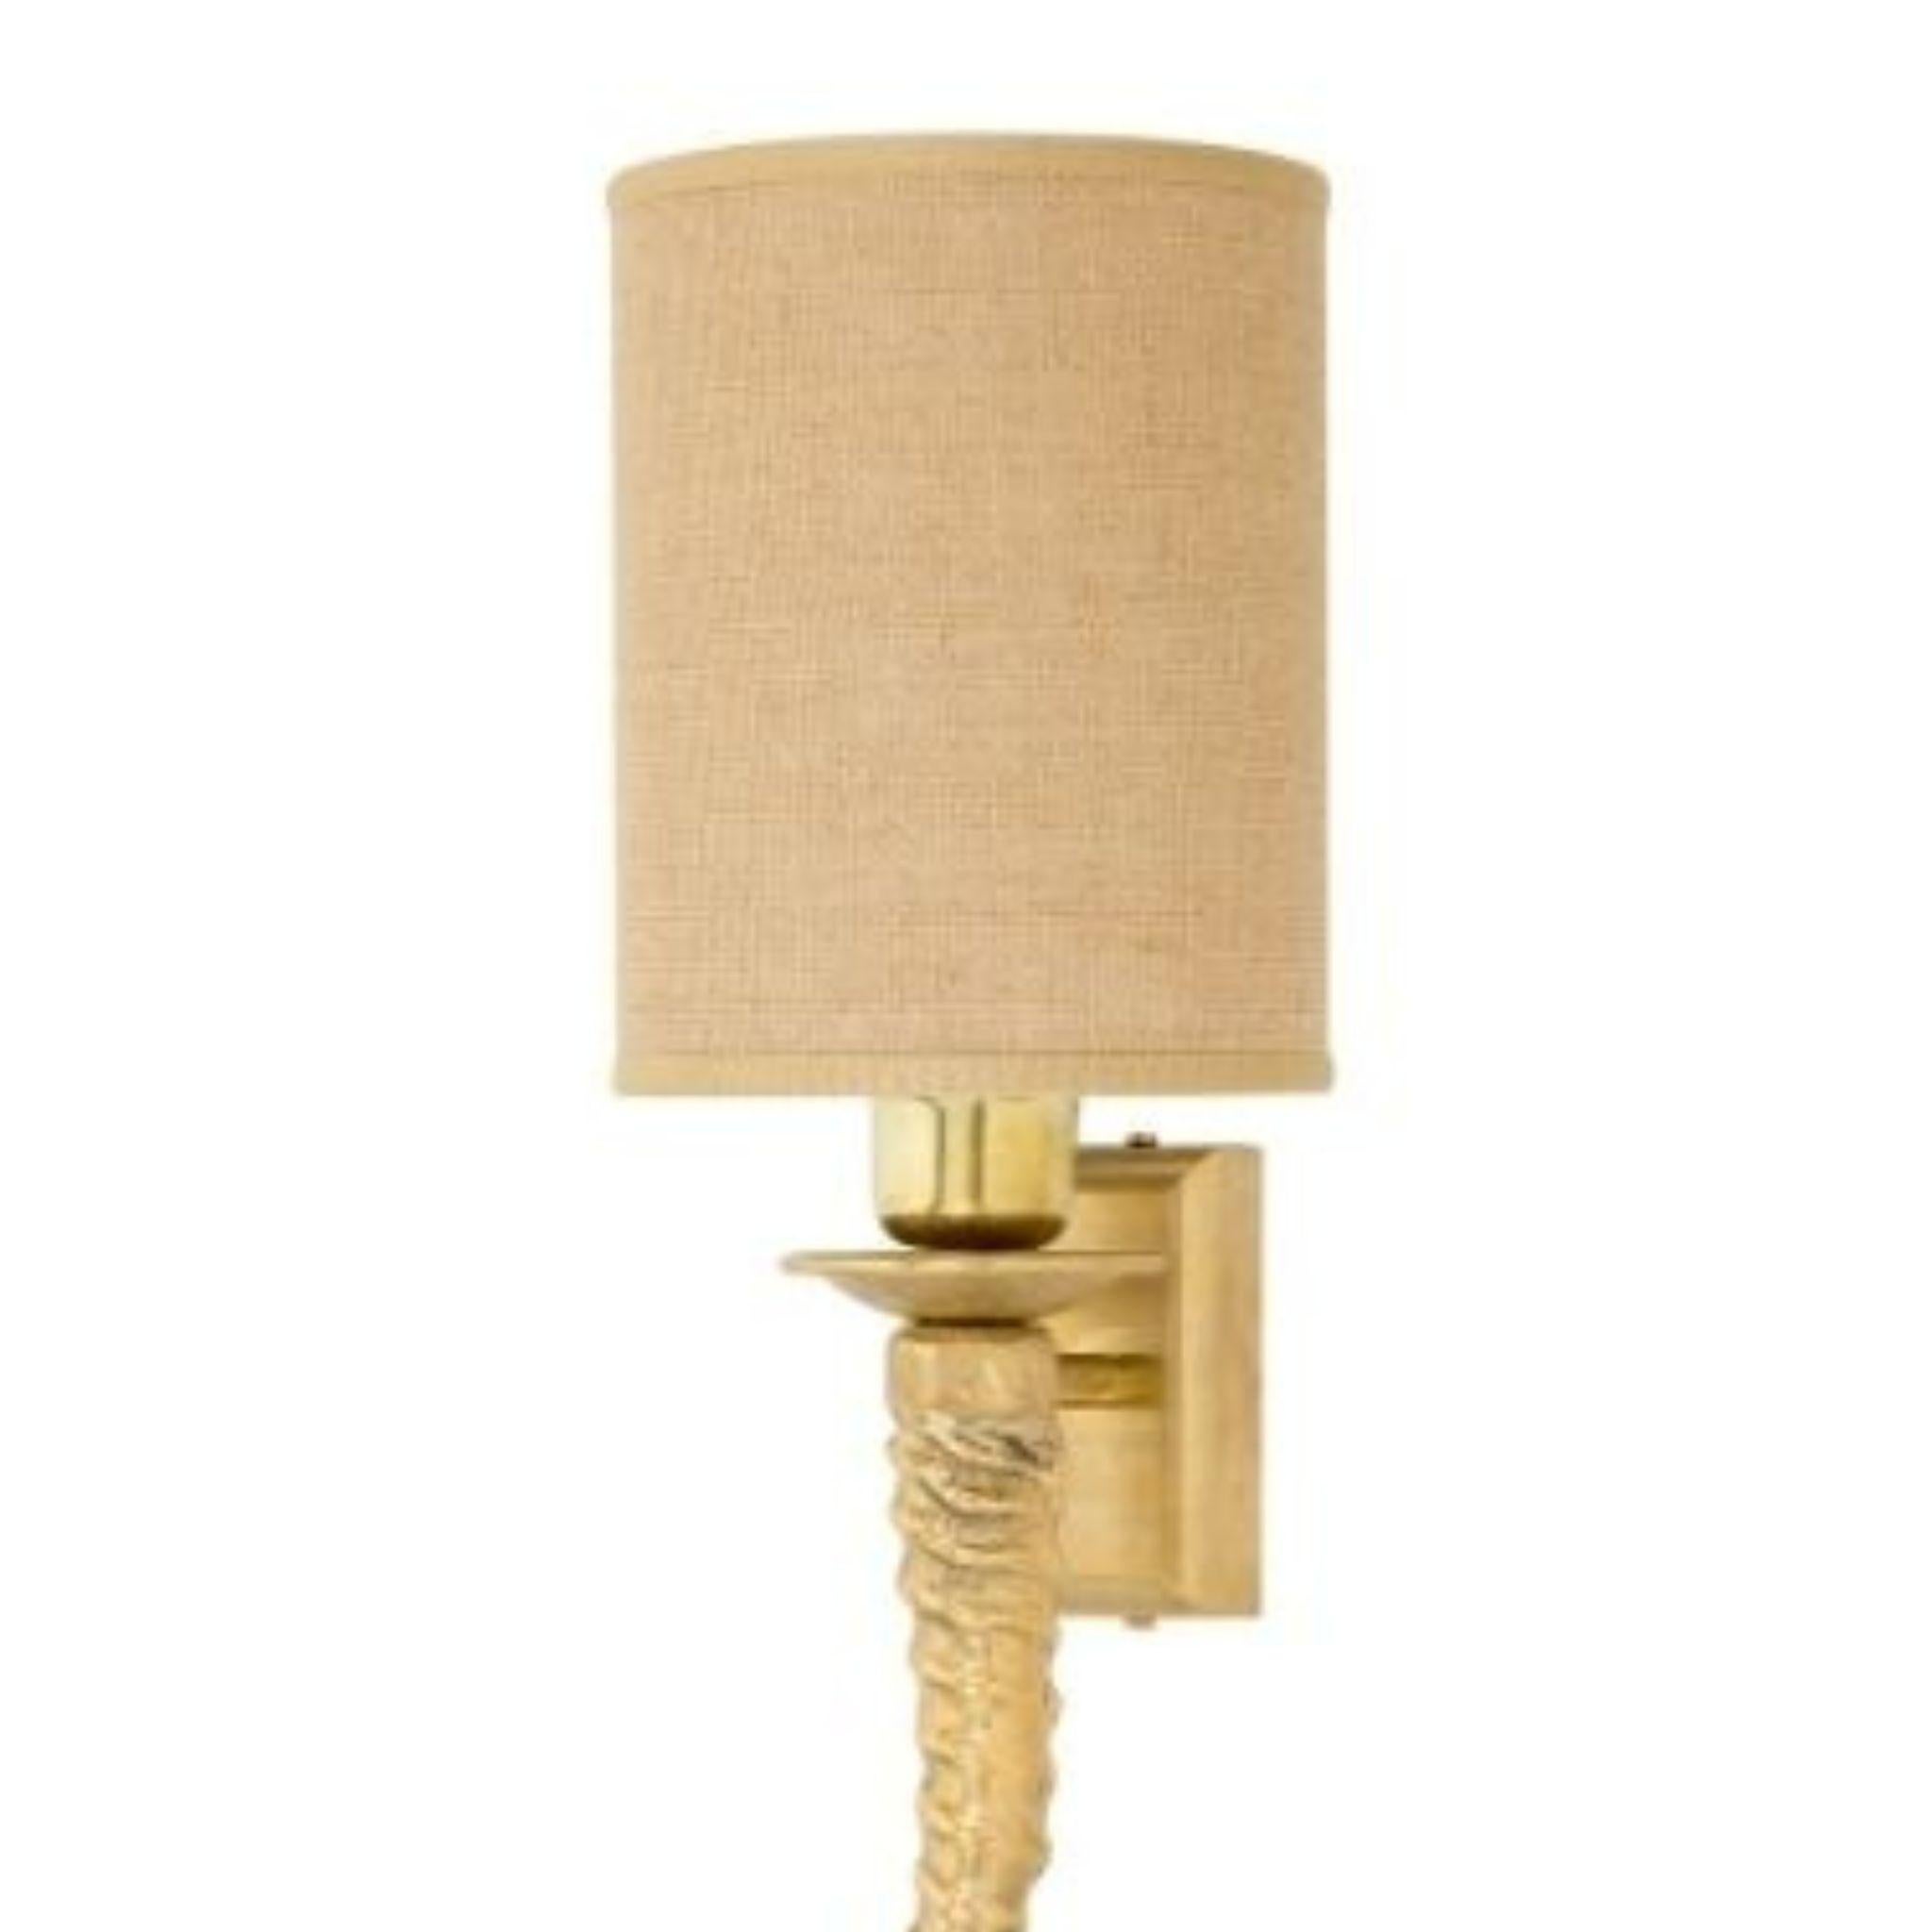 Wall lamp with horn-shaped cast brass structure and small cylindrical lampshade in loose weave fabric. This wall lamp is perfect for an animalier and jungle style interior design, an eclectic piece of furniture in which craftsmanship blends with the